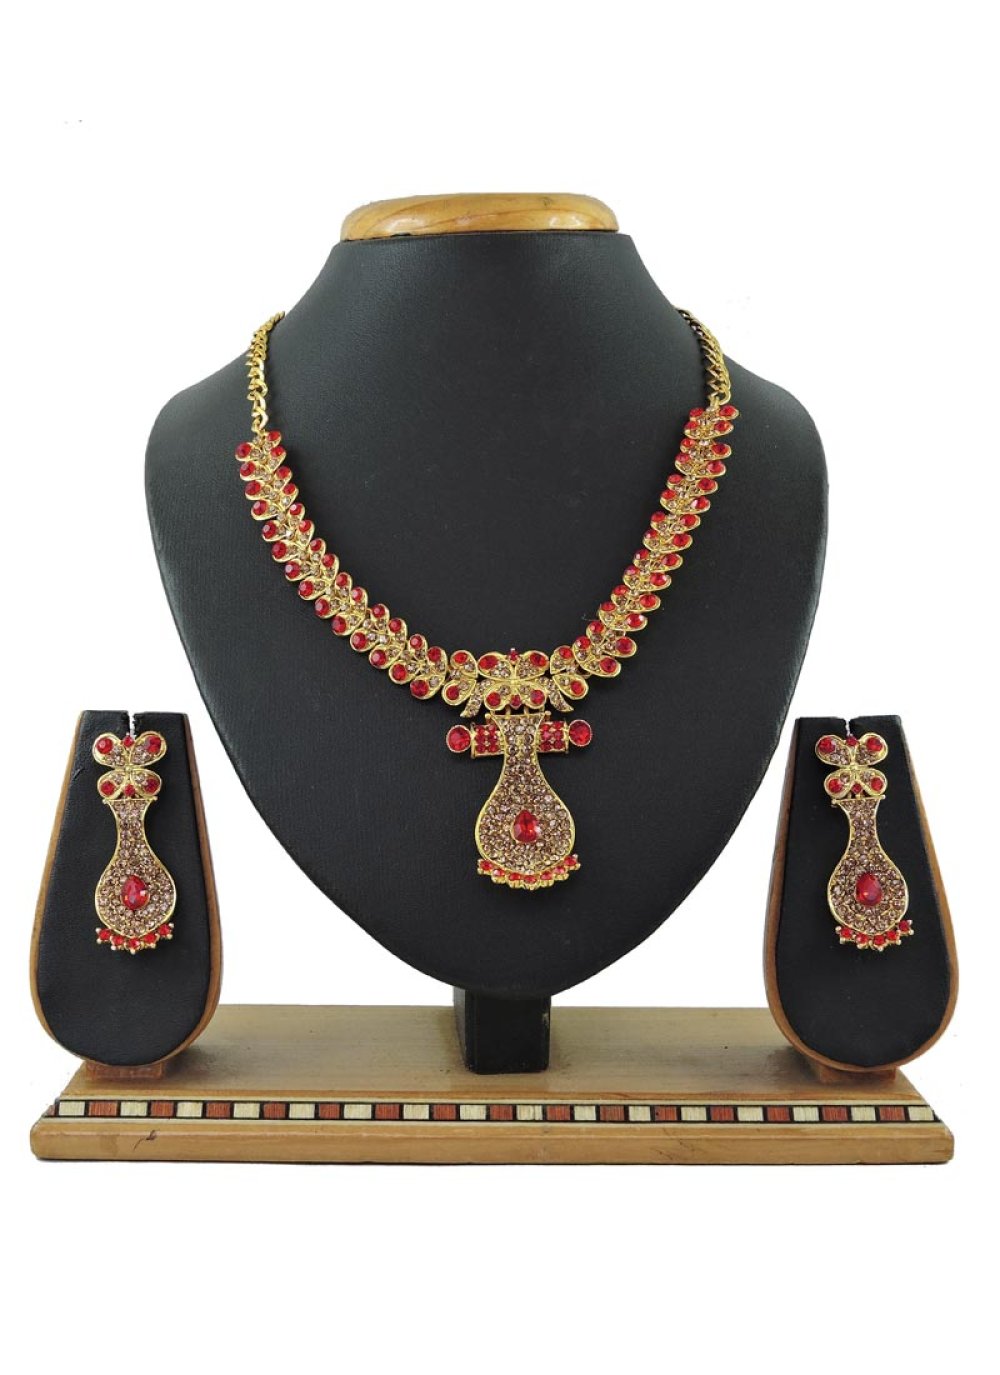 Majesty Alloy Necklace Set For Ceremonial